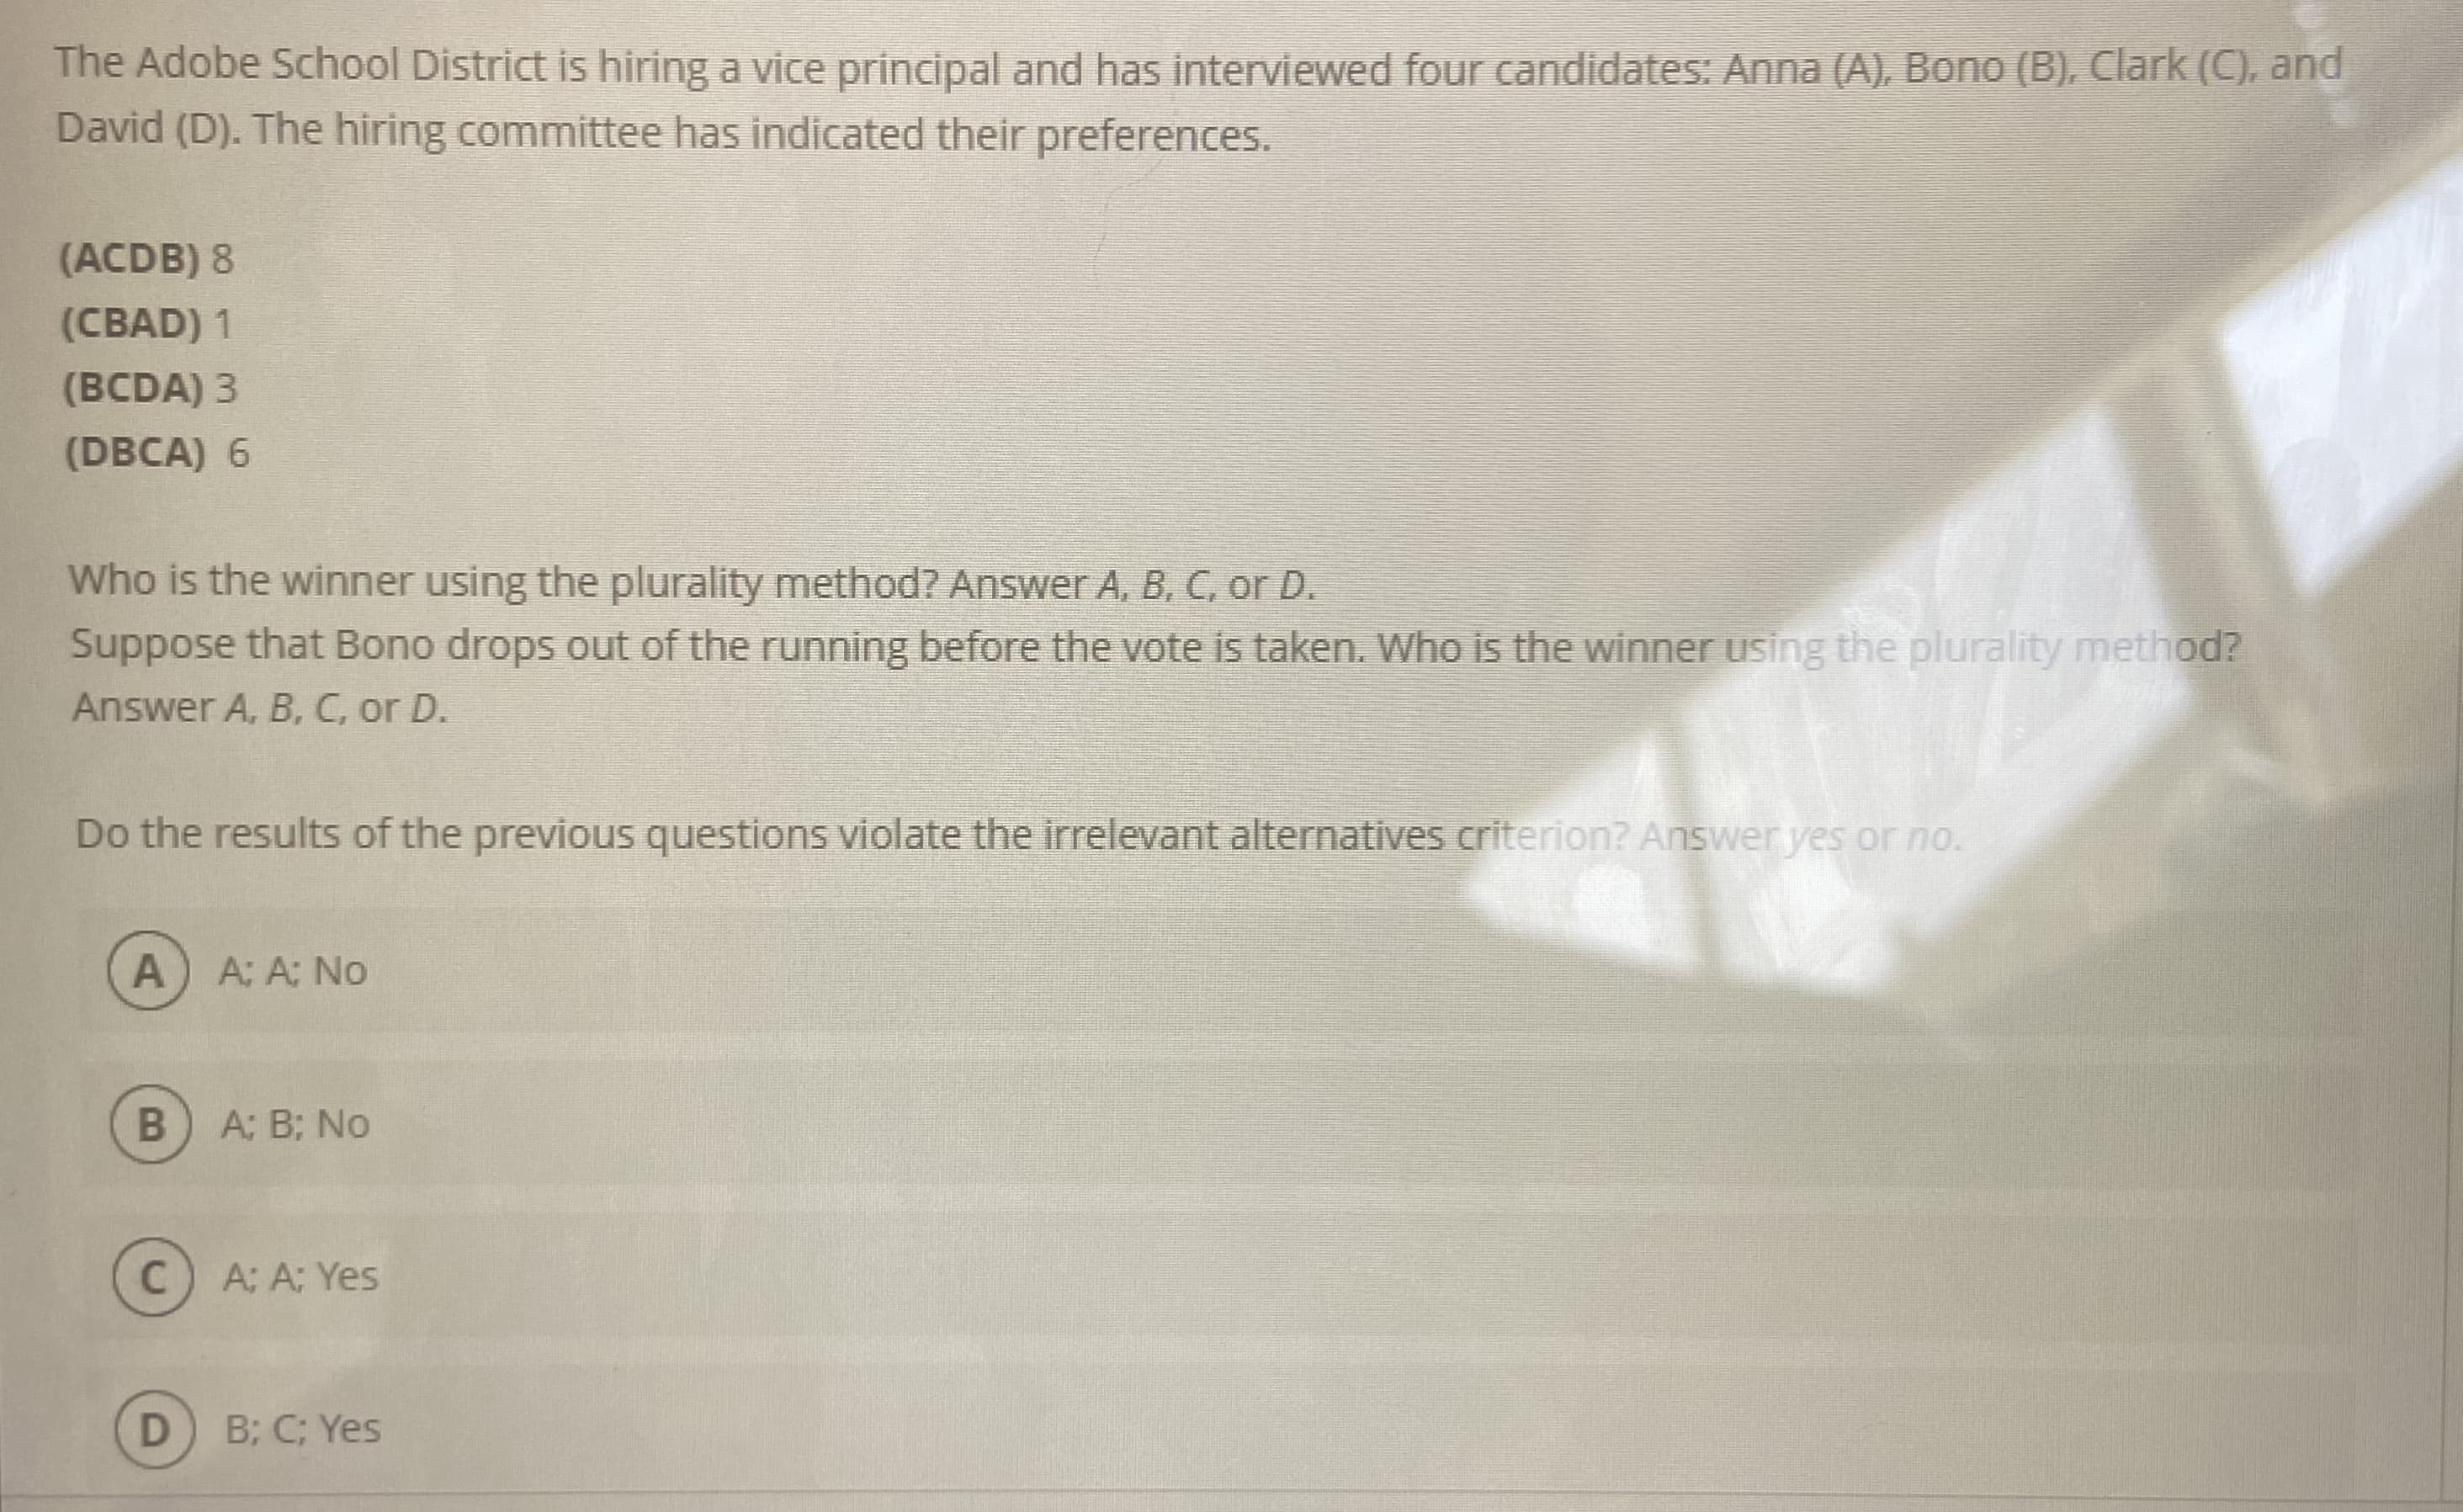 The Adobe School District is hiring a vice principal and has interviewed four candidates: Anna (A), Bono (B), Clark (C), and
David (D). The hiring committee has indicated their preferences.
(ACDB) 8
(CBAD) 1
(BCDA) 3
(DBCA) 6
Who is the winner using the plurality method? Answer A, B, C, or D.
Suppose that Bono drops out of the running before the vote is taken. Who is the winner using the plurality method?
Answer A, B, C, or D.
Do the results of the previous questions violate the irrelevant alternatives criterion? Answer yes or no.
